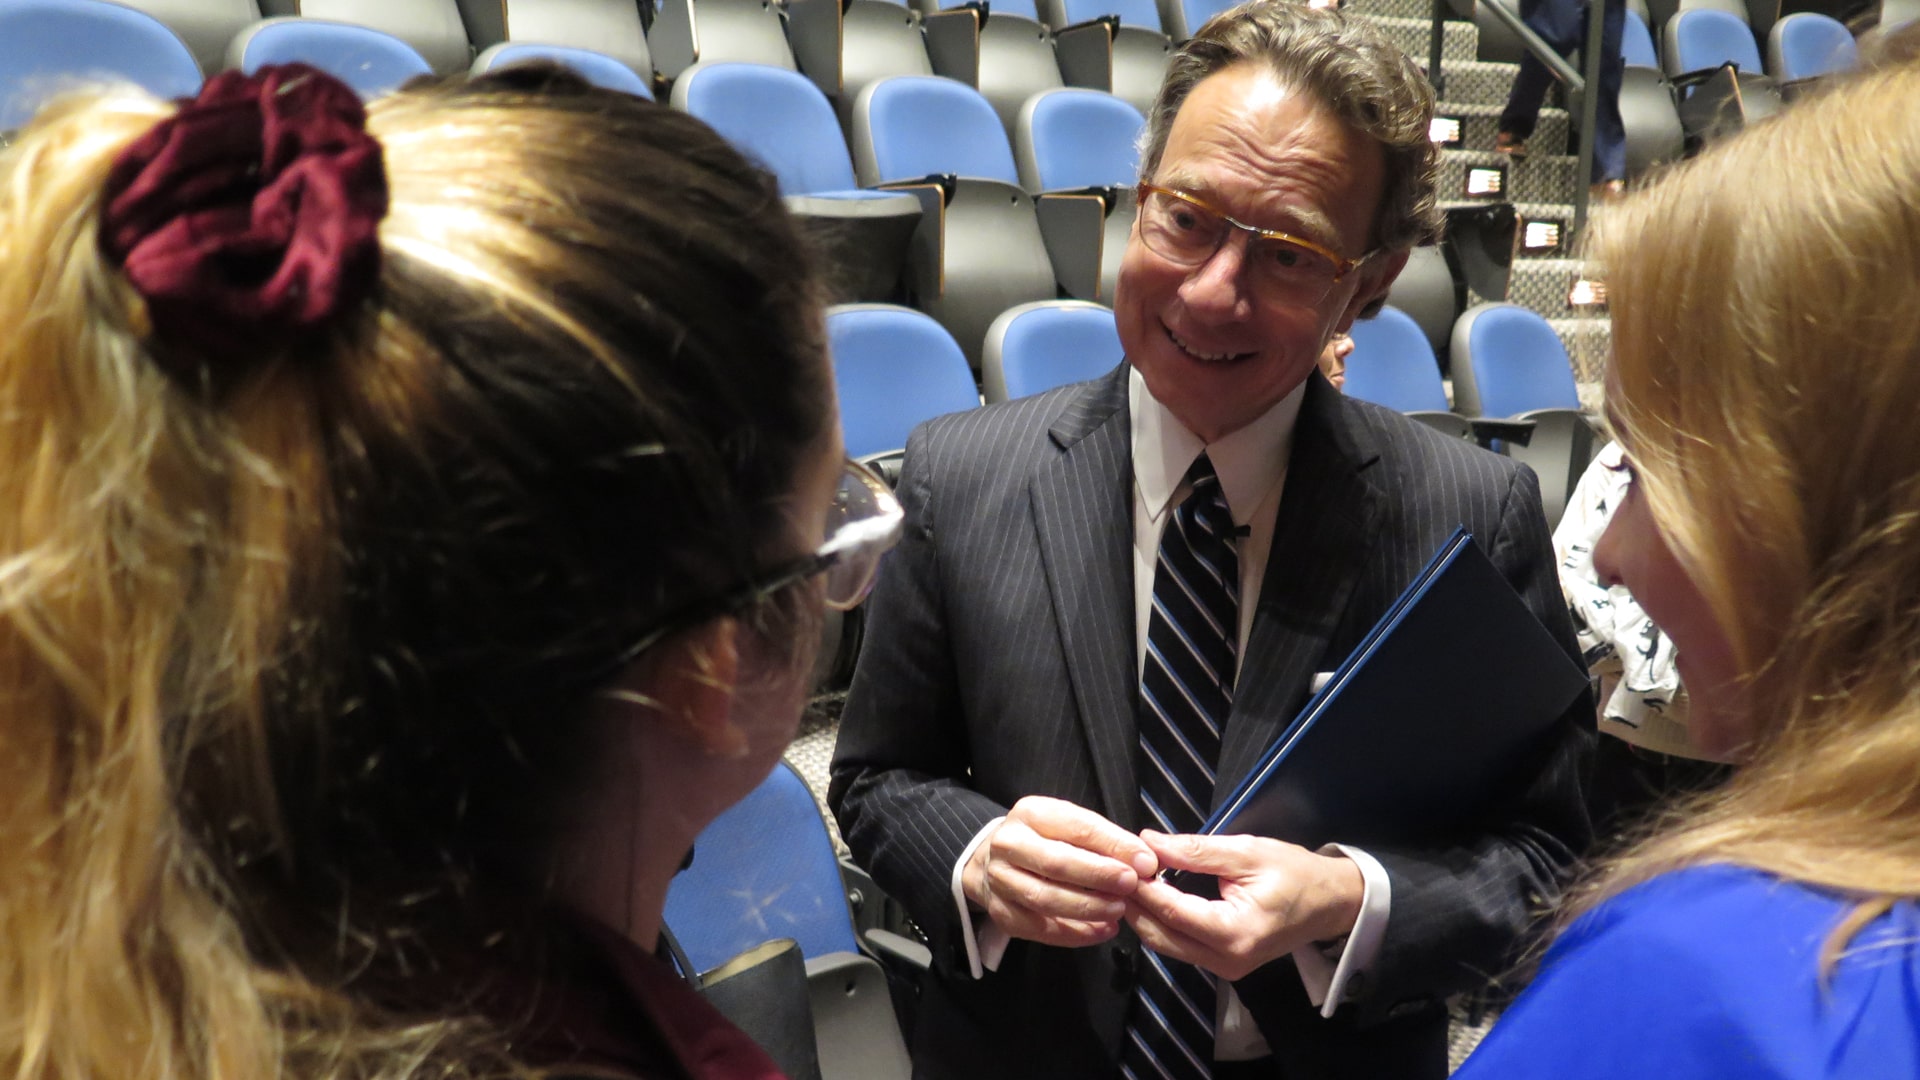 Foundation for the Carolinas CEO Michael Marsicano speaks to JWU students about the career-defining battle he fought over bringing the Pulitzer Prize-winning play, “Angels in America” to Charlotte.